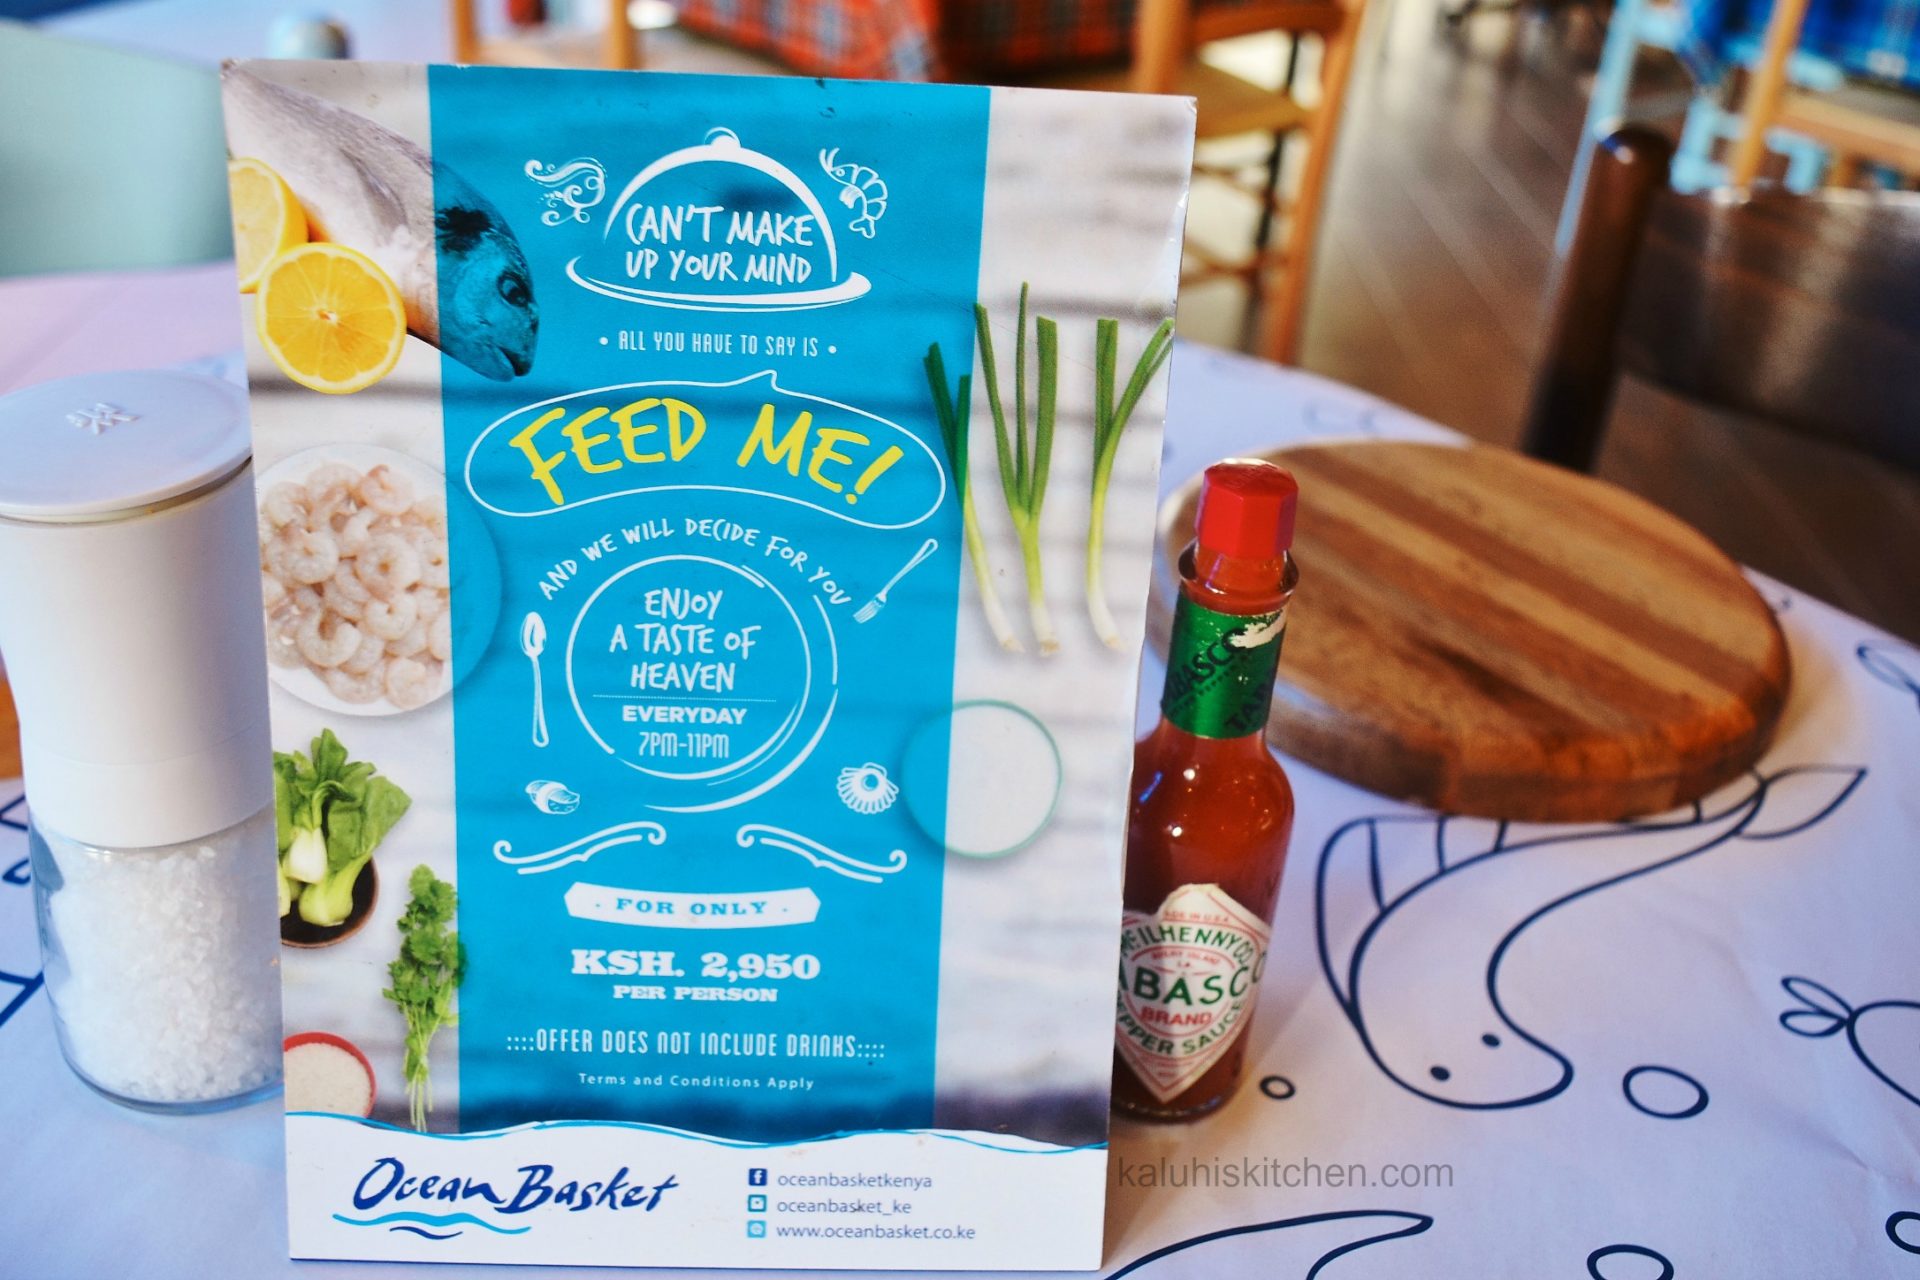 feed me promo at the ocean basket available every day fofm 7 pm to 11 pm_best seafood restaurant in kenya_kaluhiskitchen.com